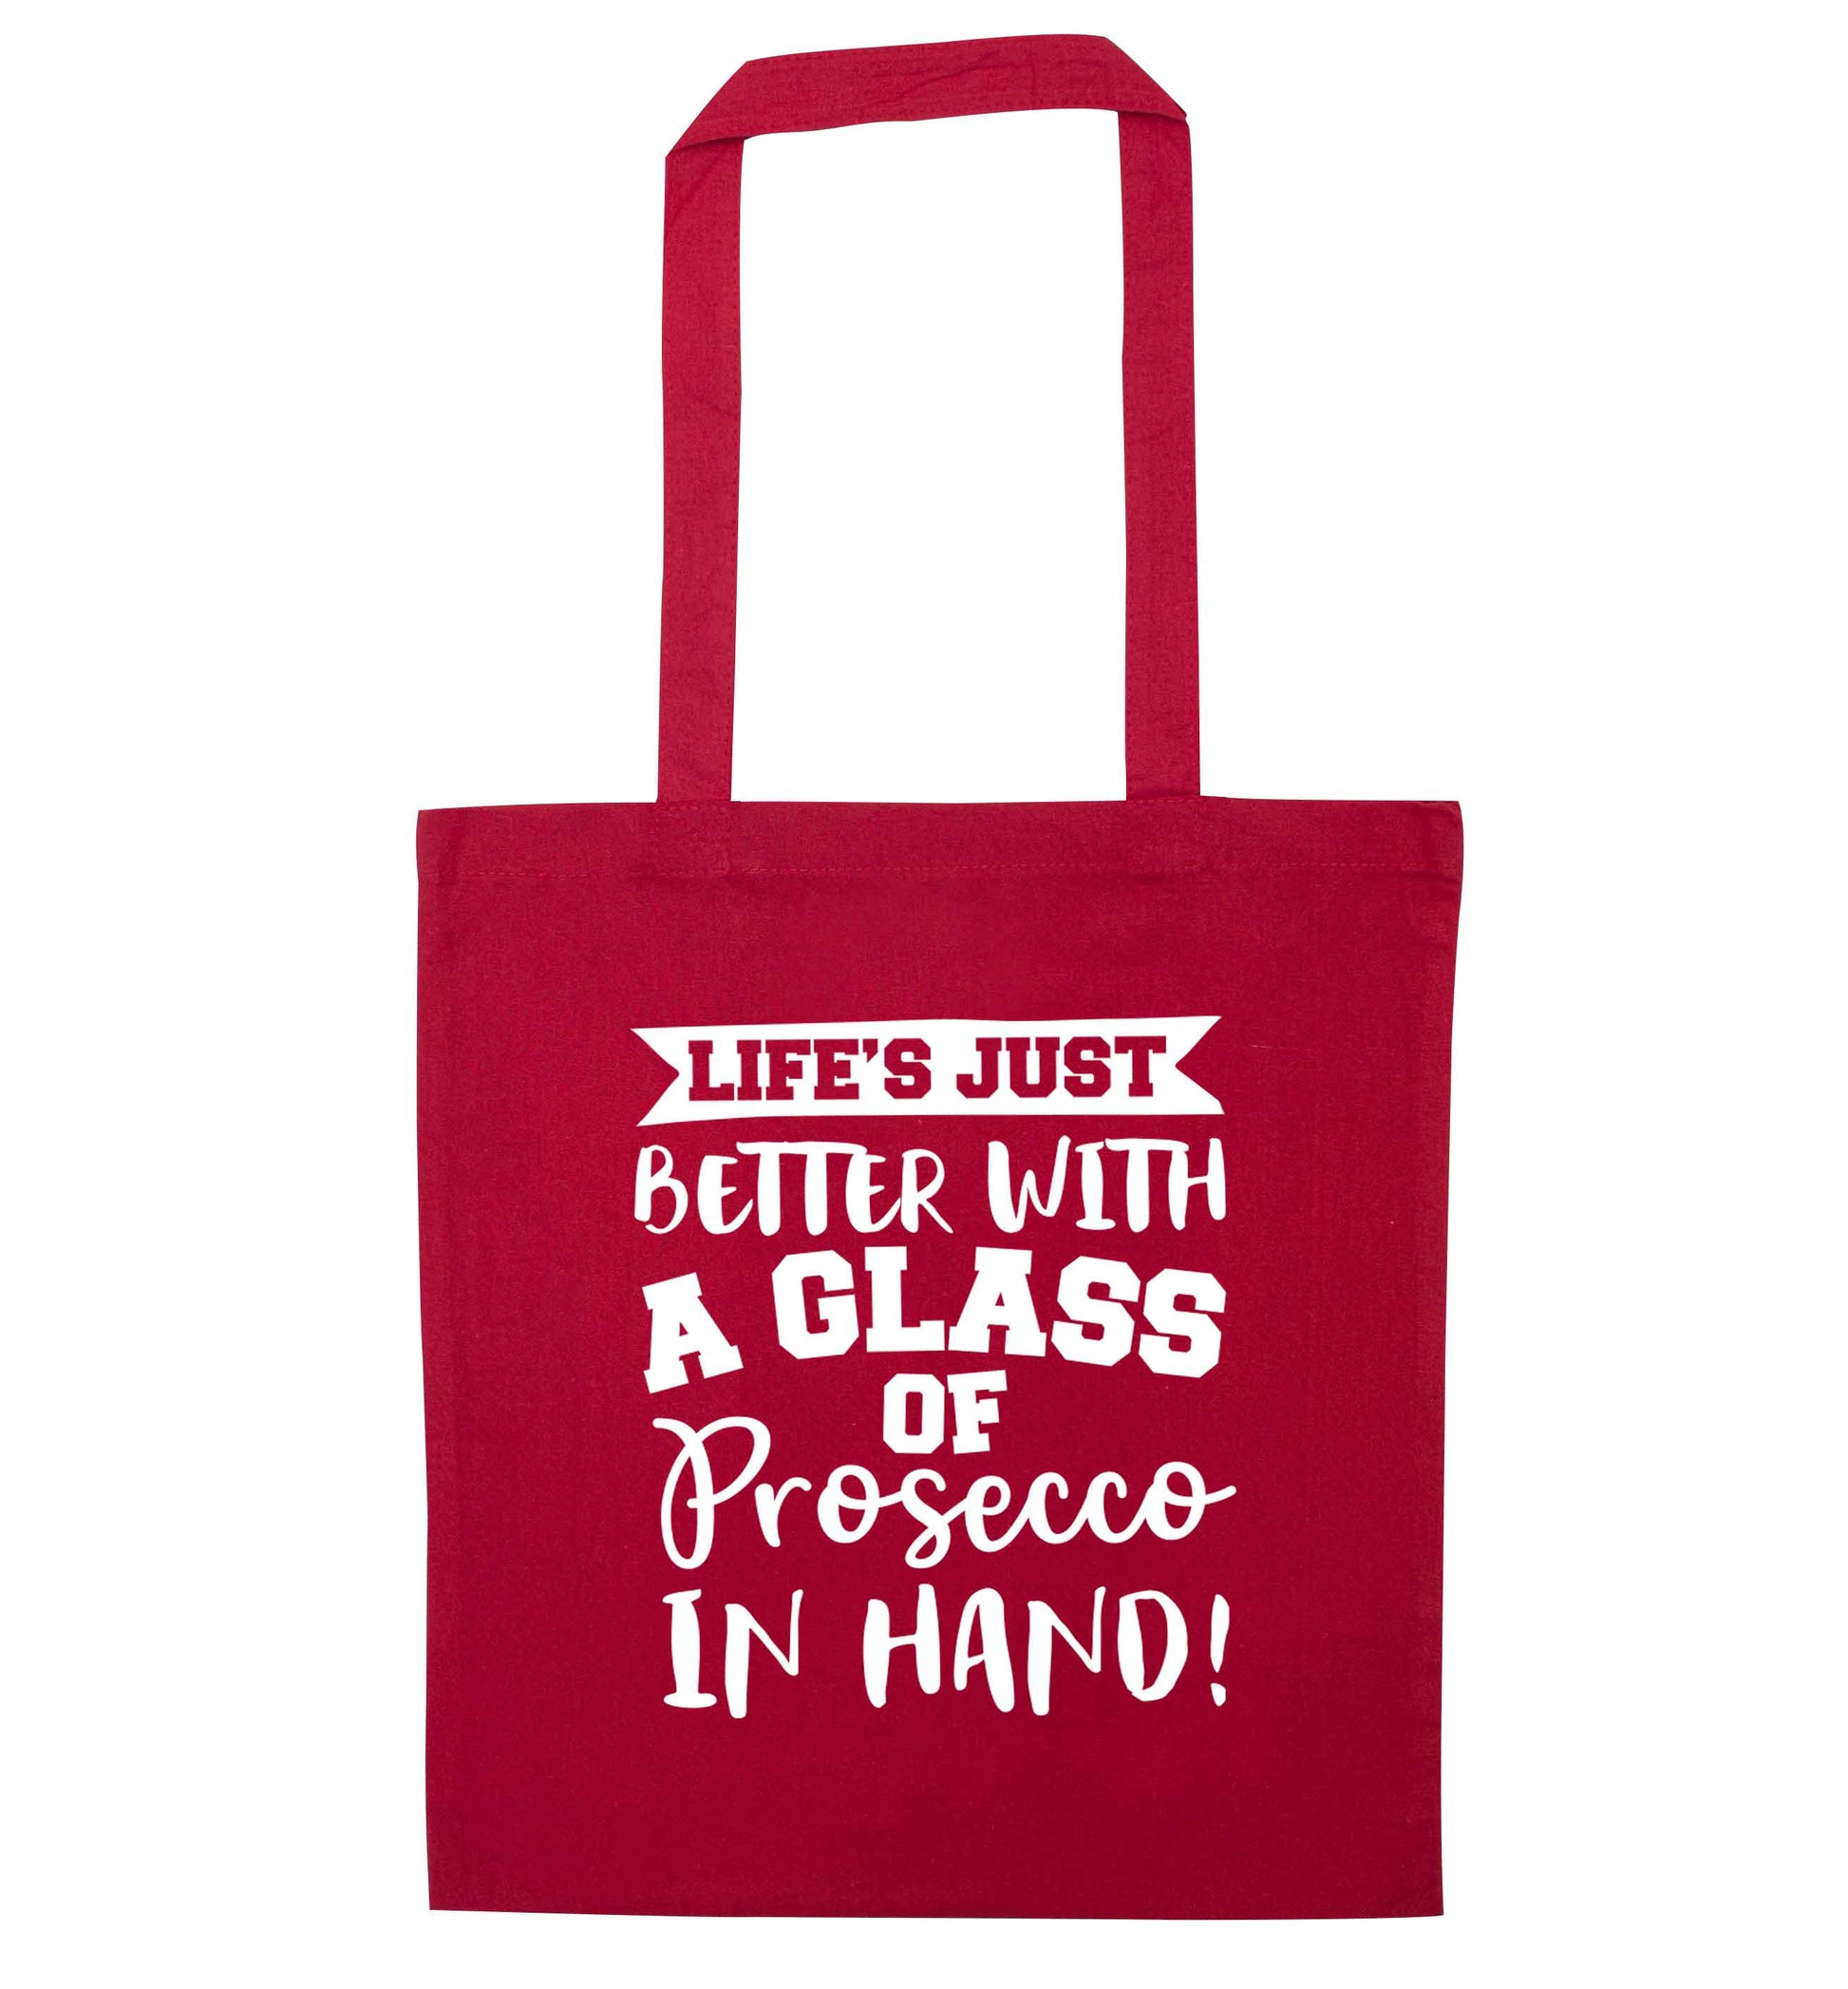 Life's just better with a glass of prosecco in hand red tote bag